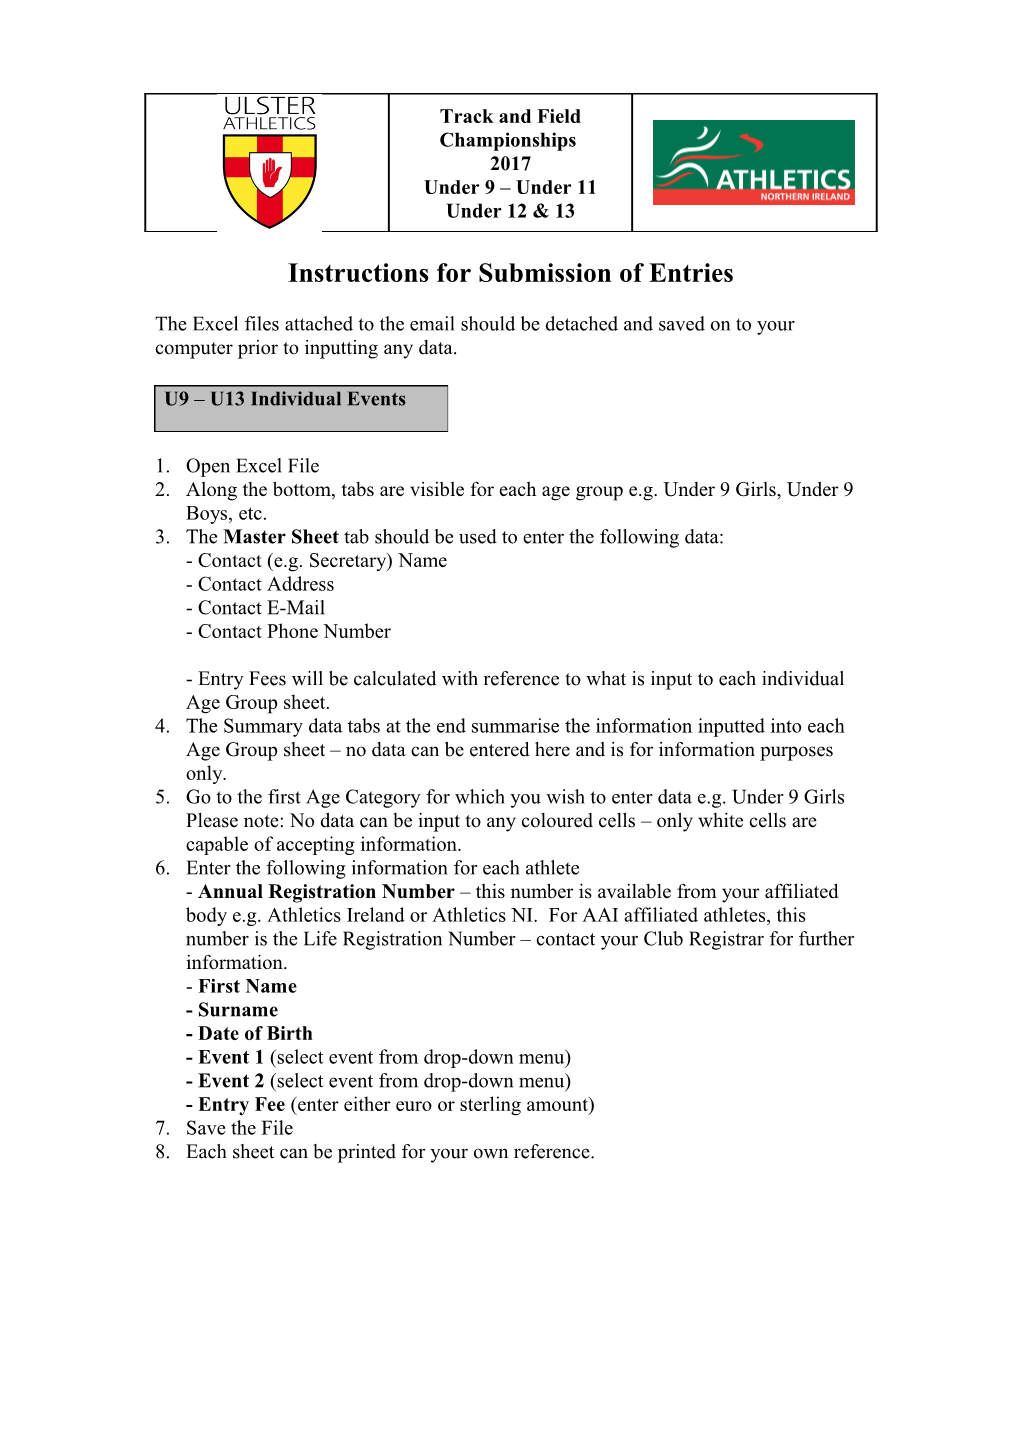 Instructions for Submission of Entries